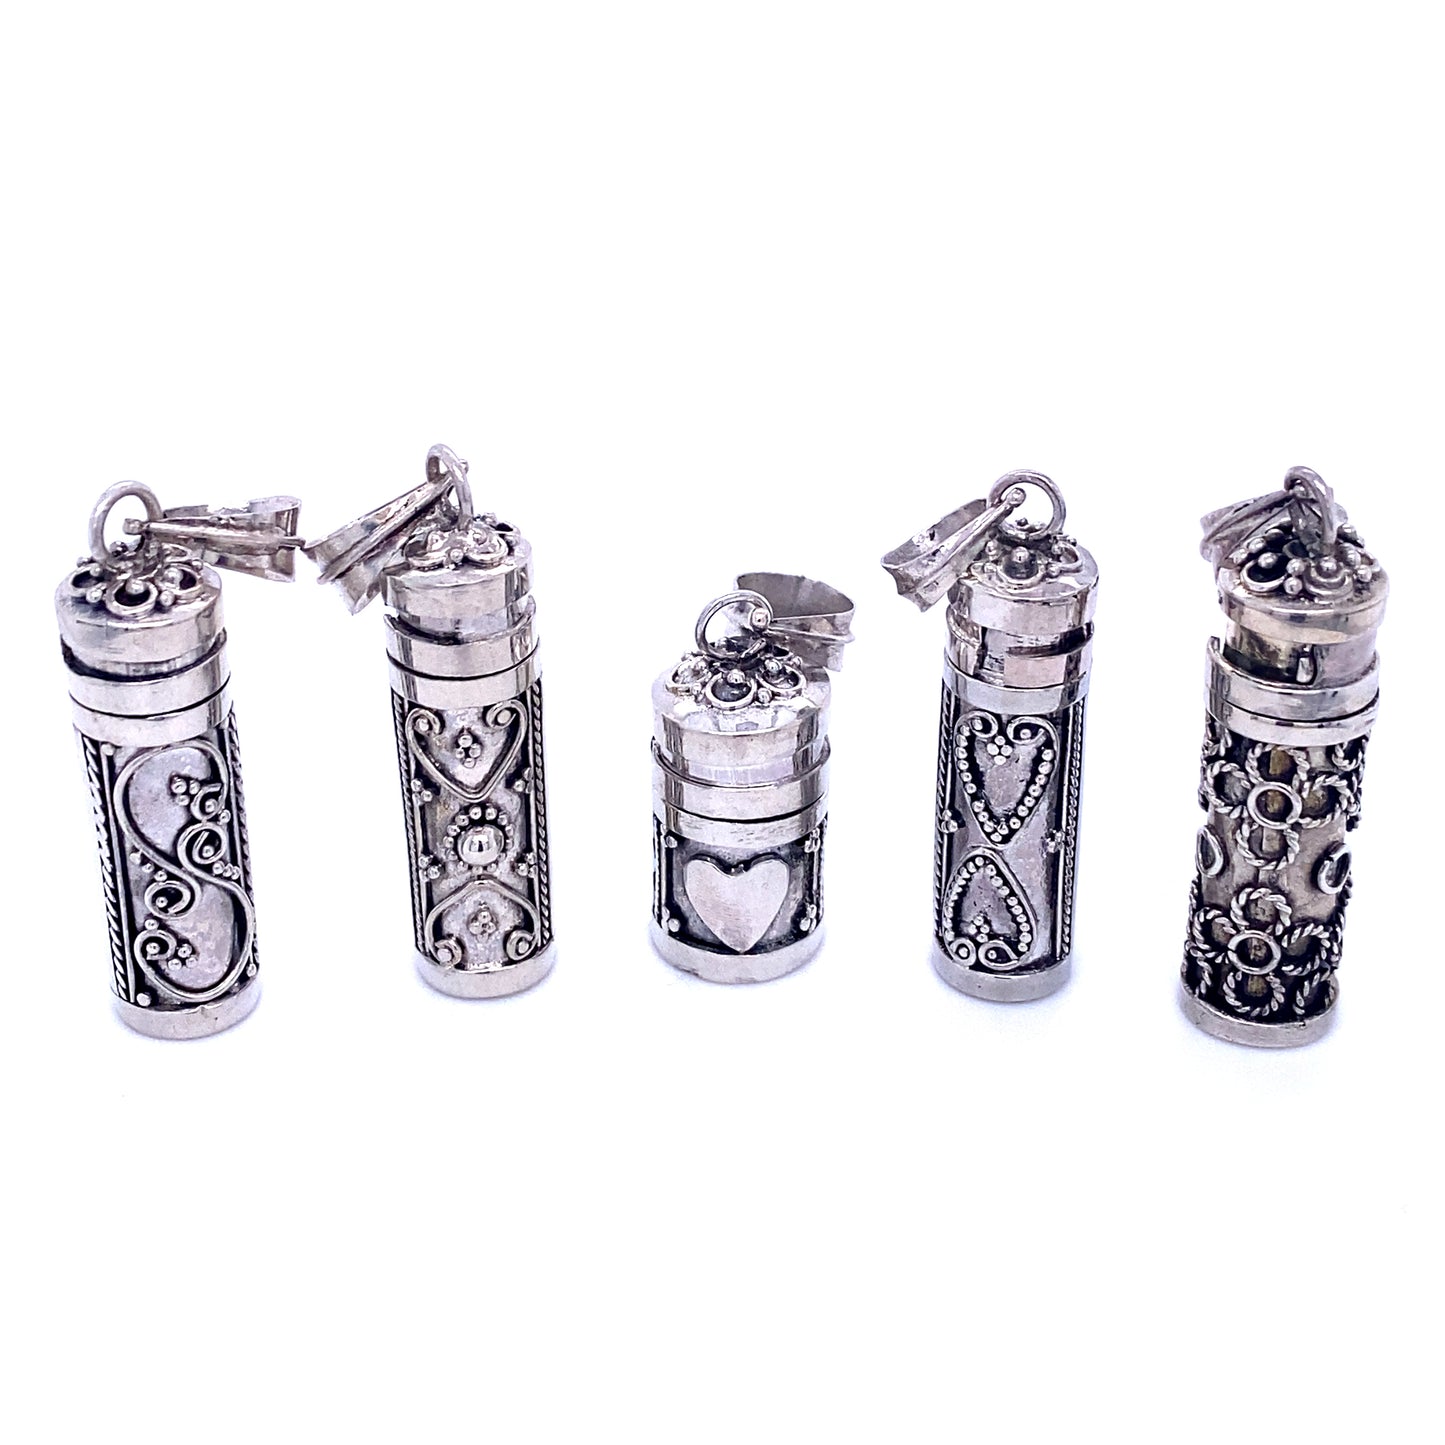 A collection of Super Silver prayer box pendants adorned with hearts, serving as religious mementos.